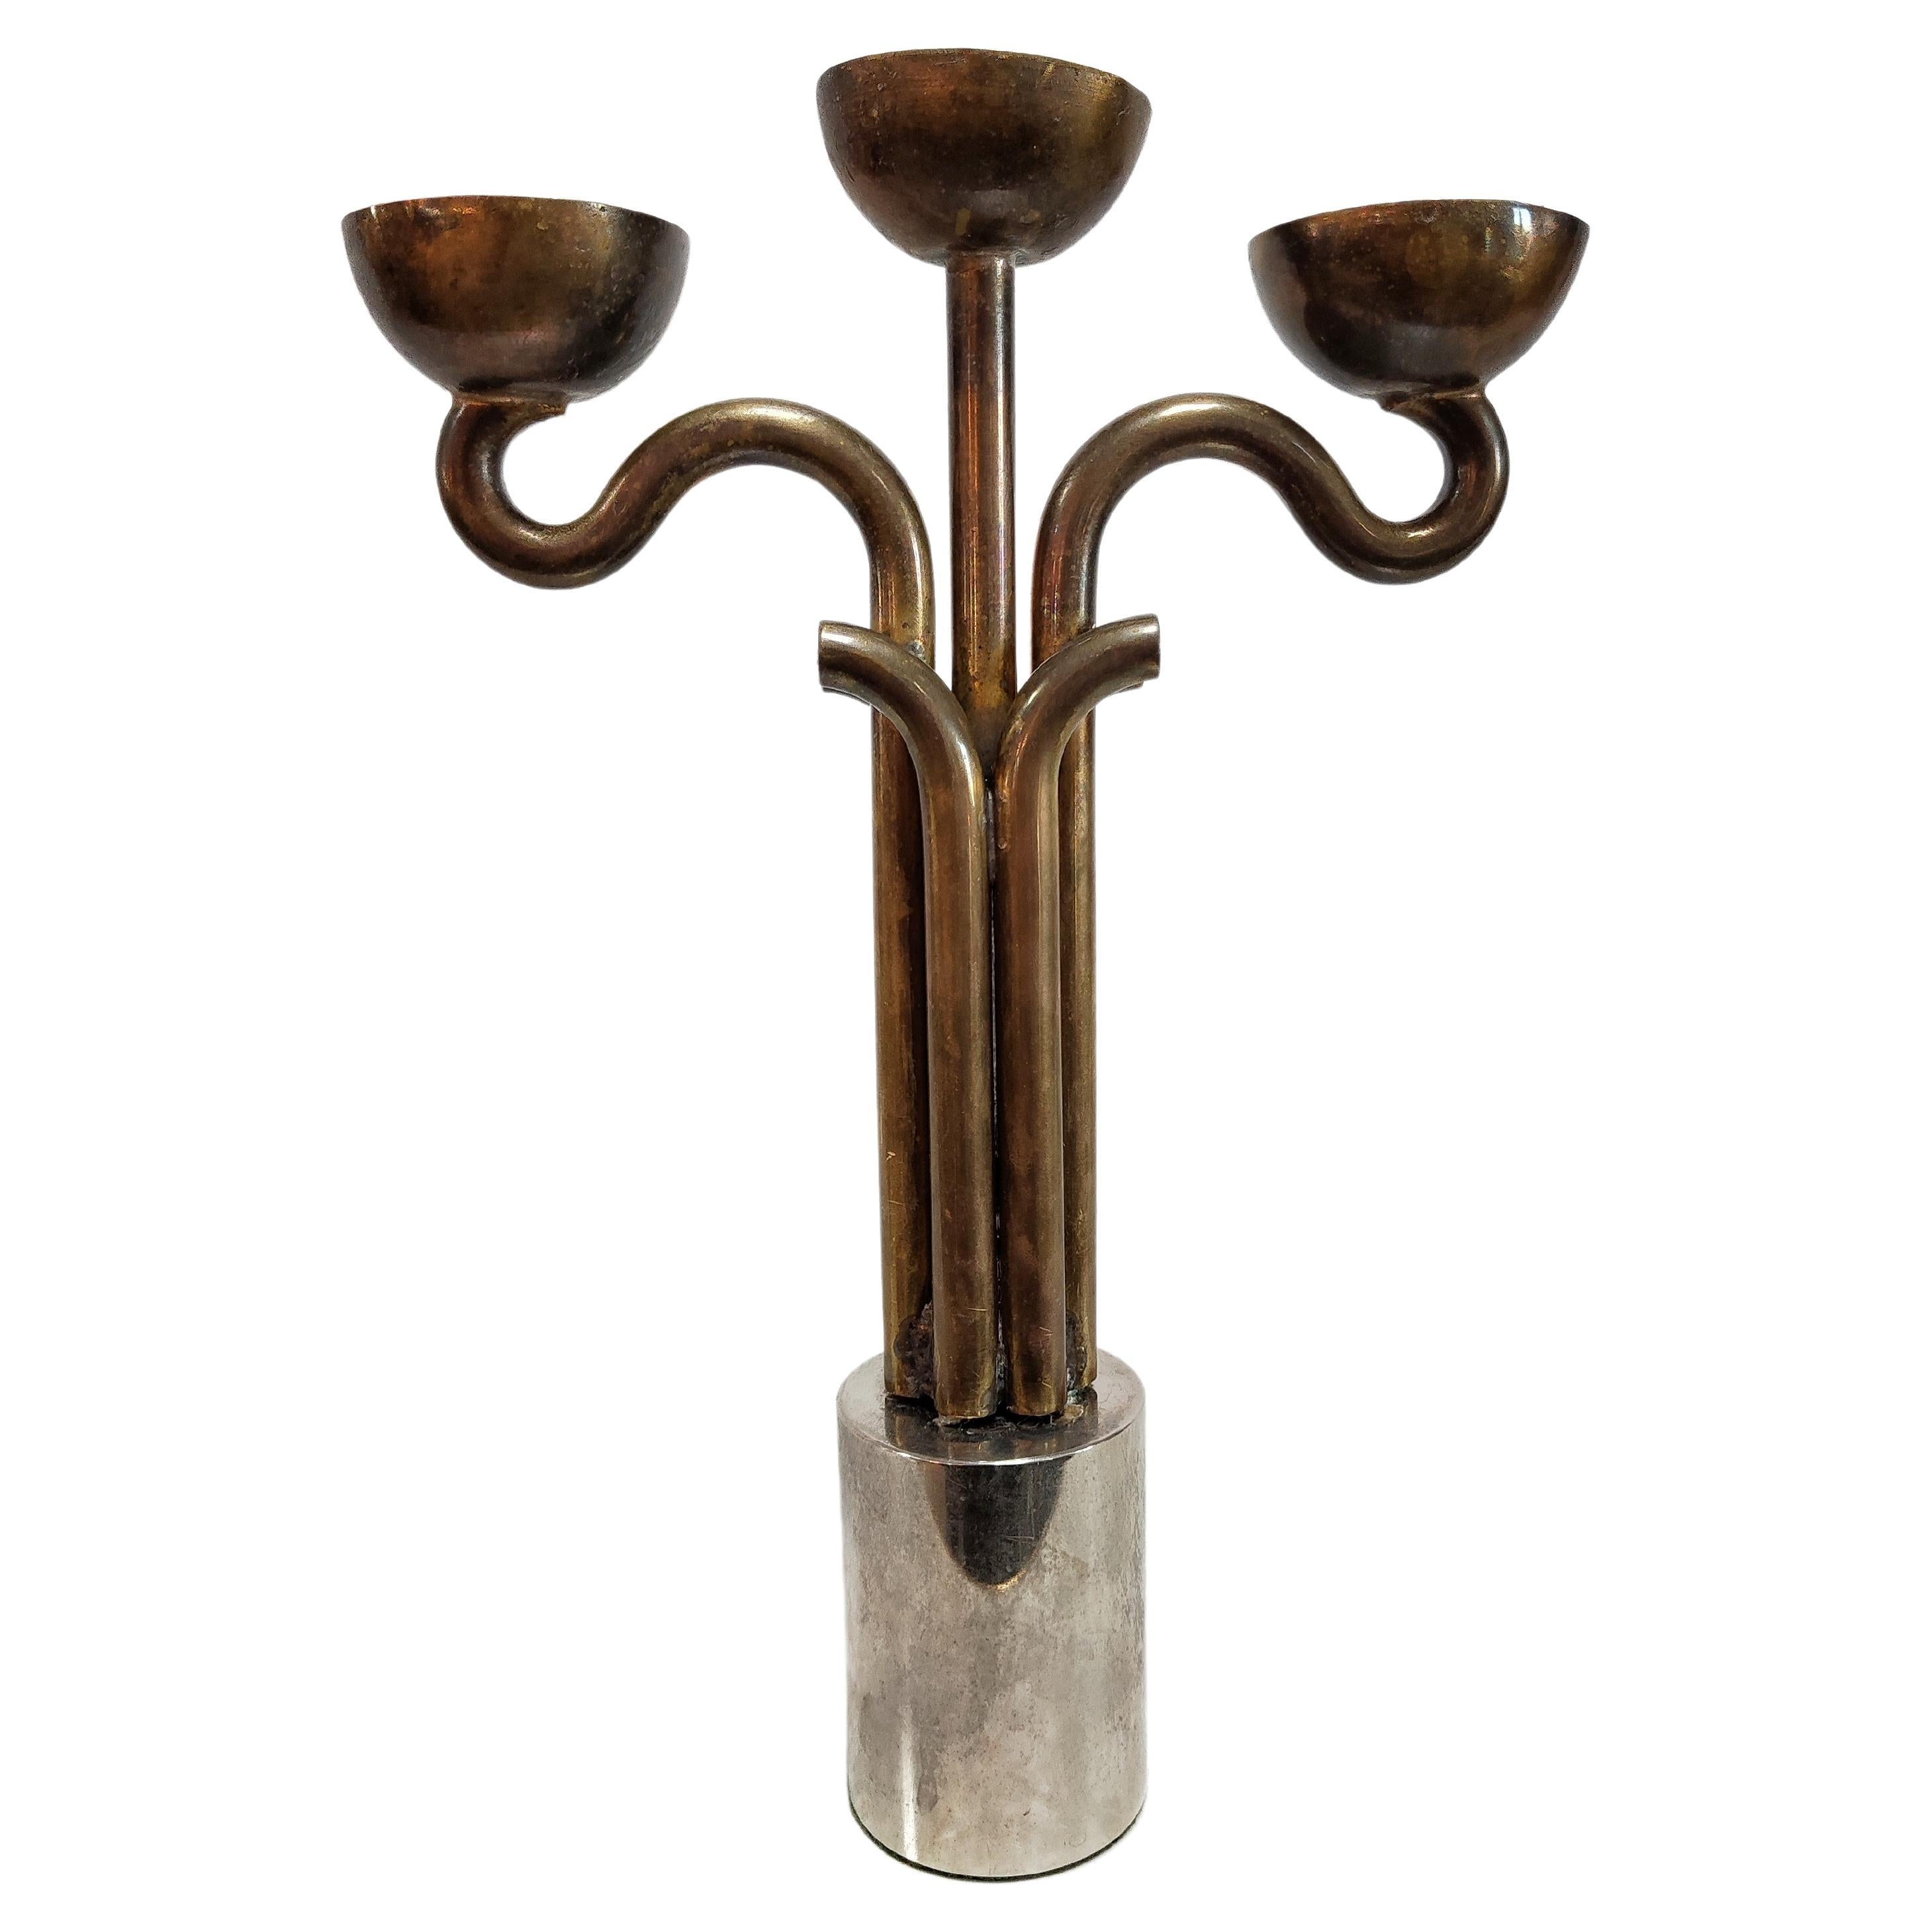 Brutalist Candlestick Holder Done in Brass and Nickel, Italy, 1970s